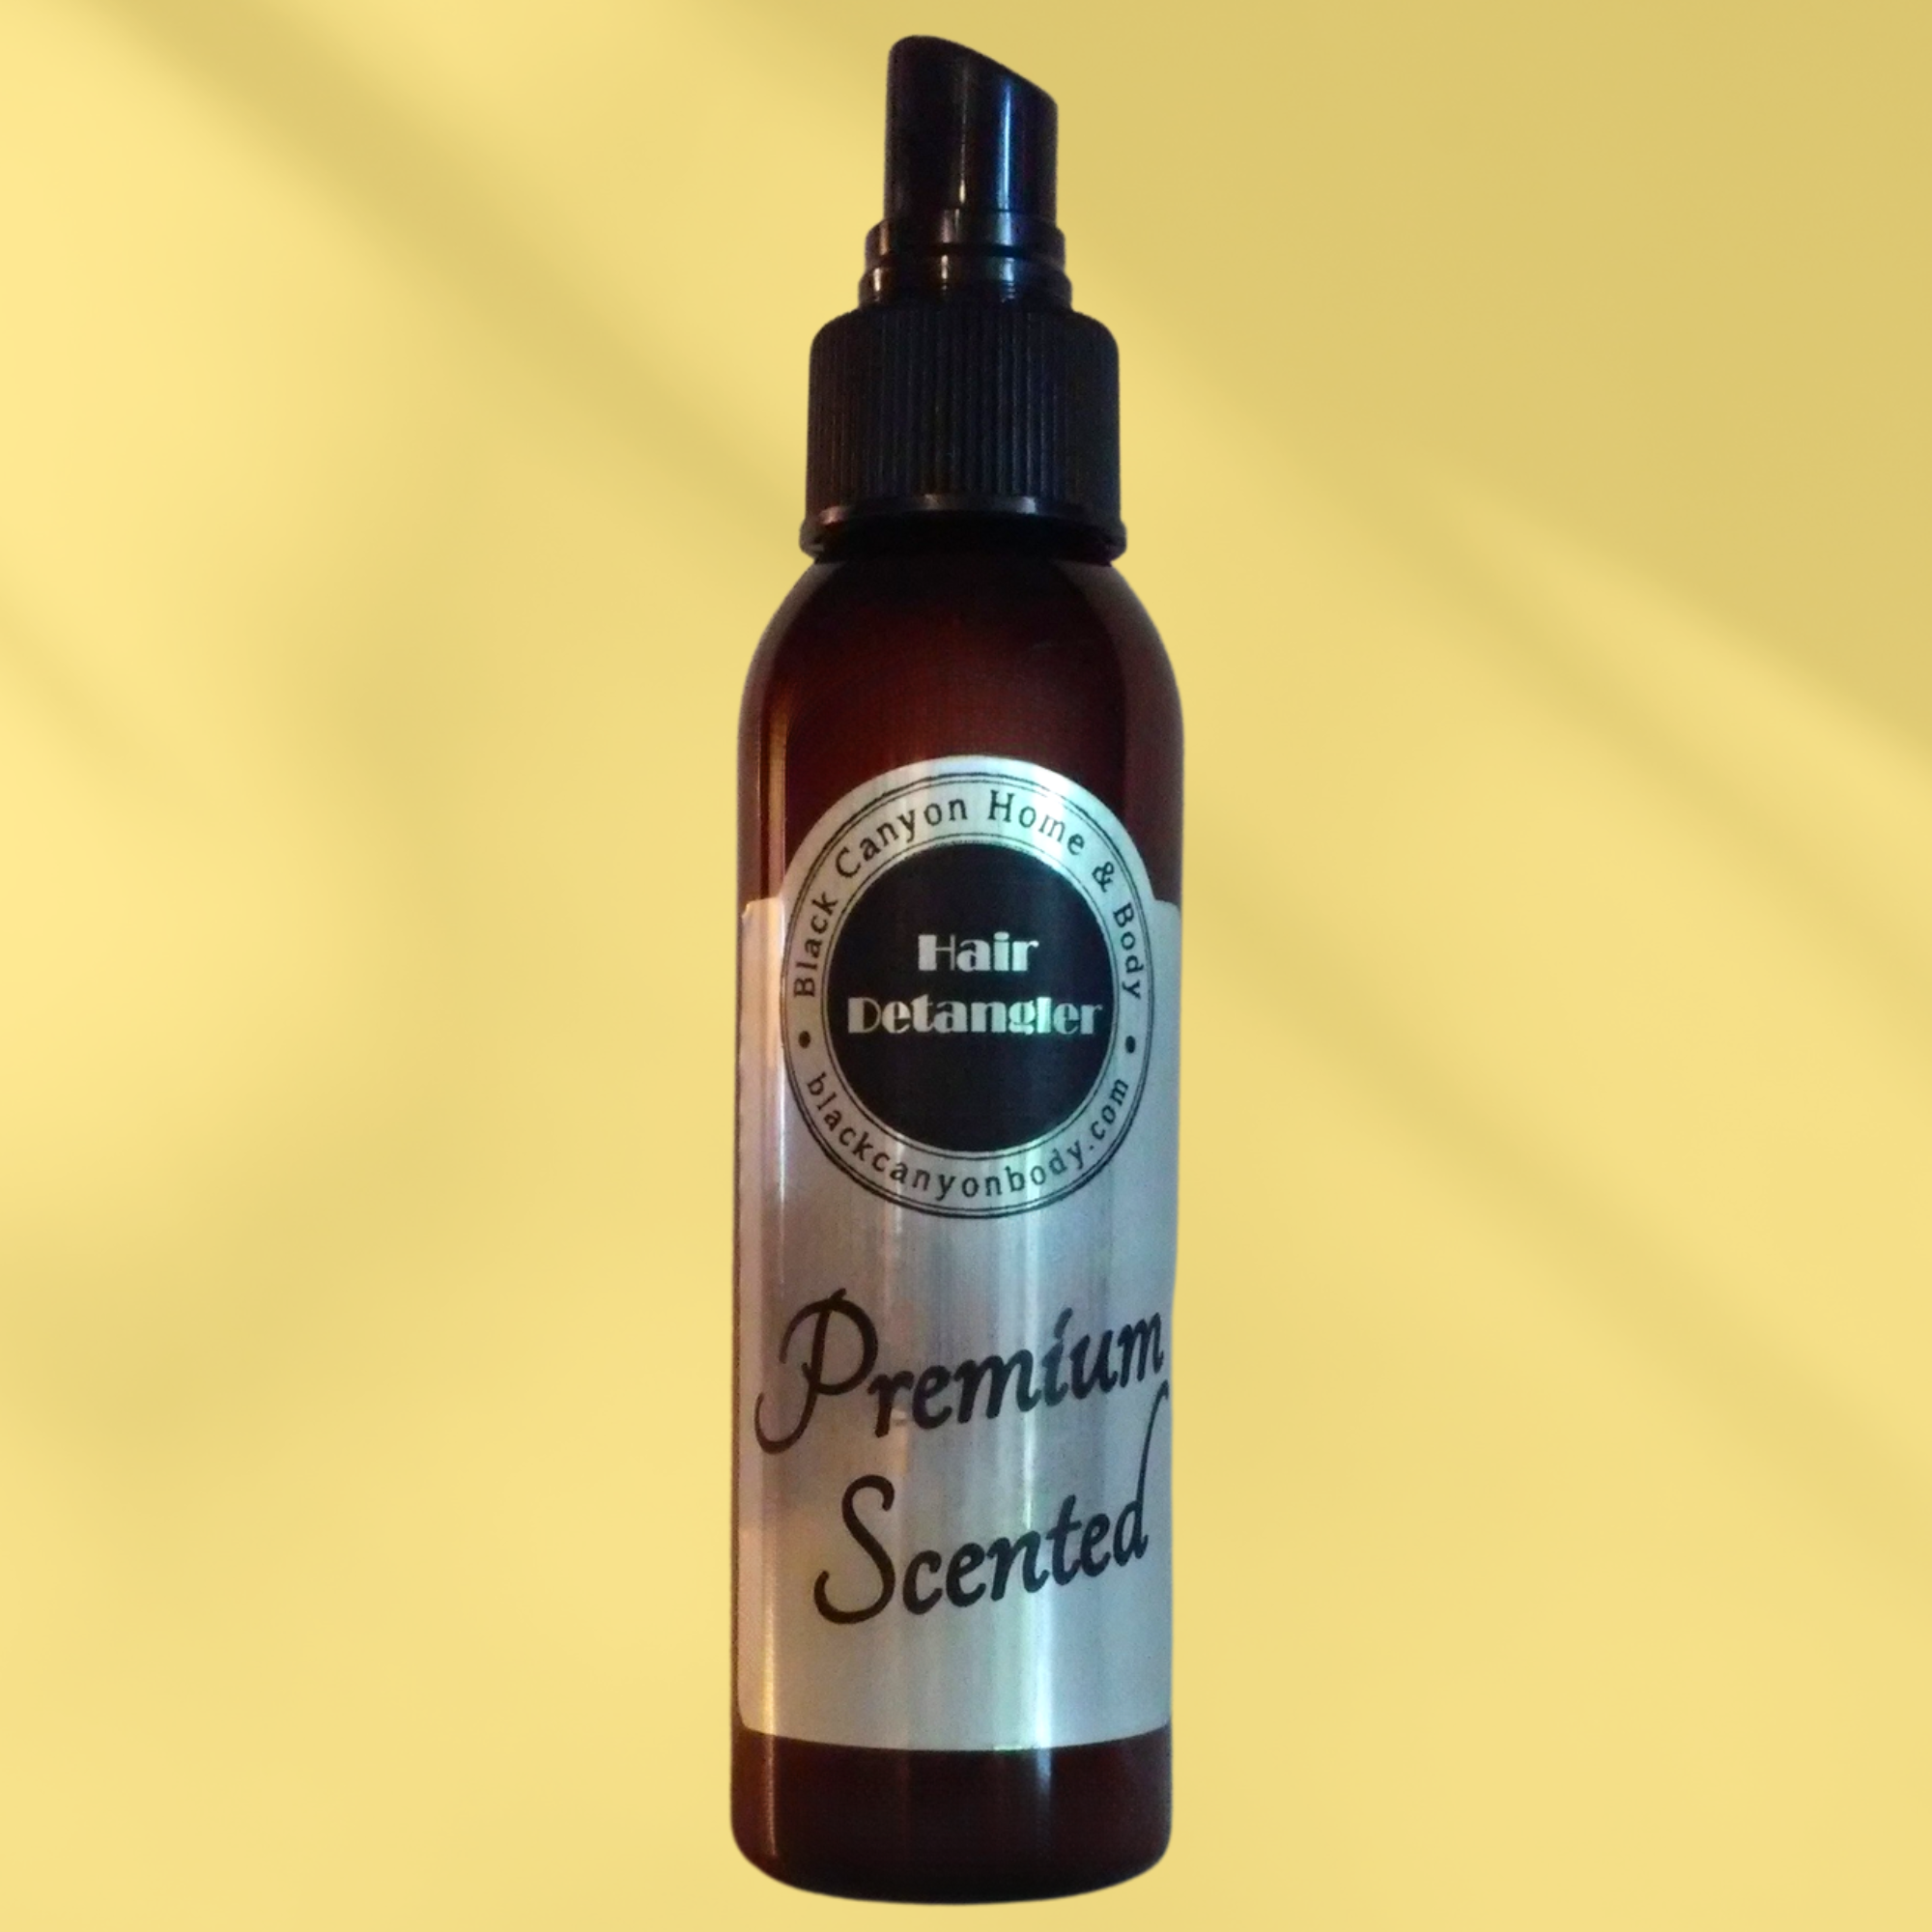 Black Canyon Friday Scented Hair Detangler Spray with Olive Oil